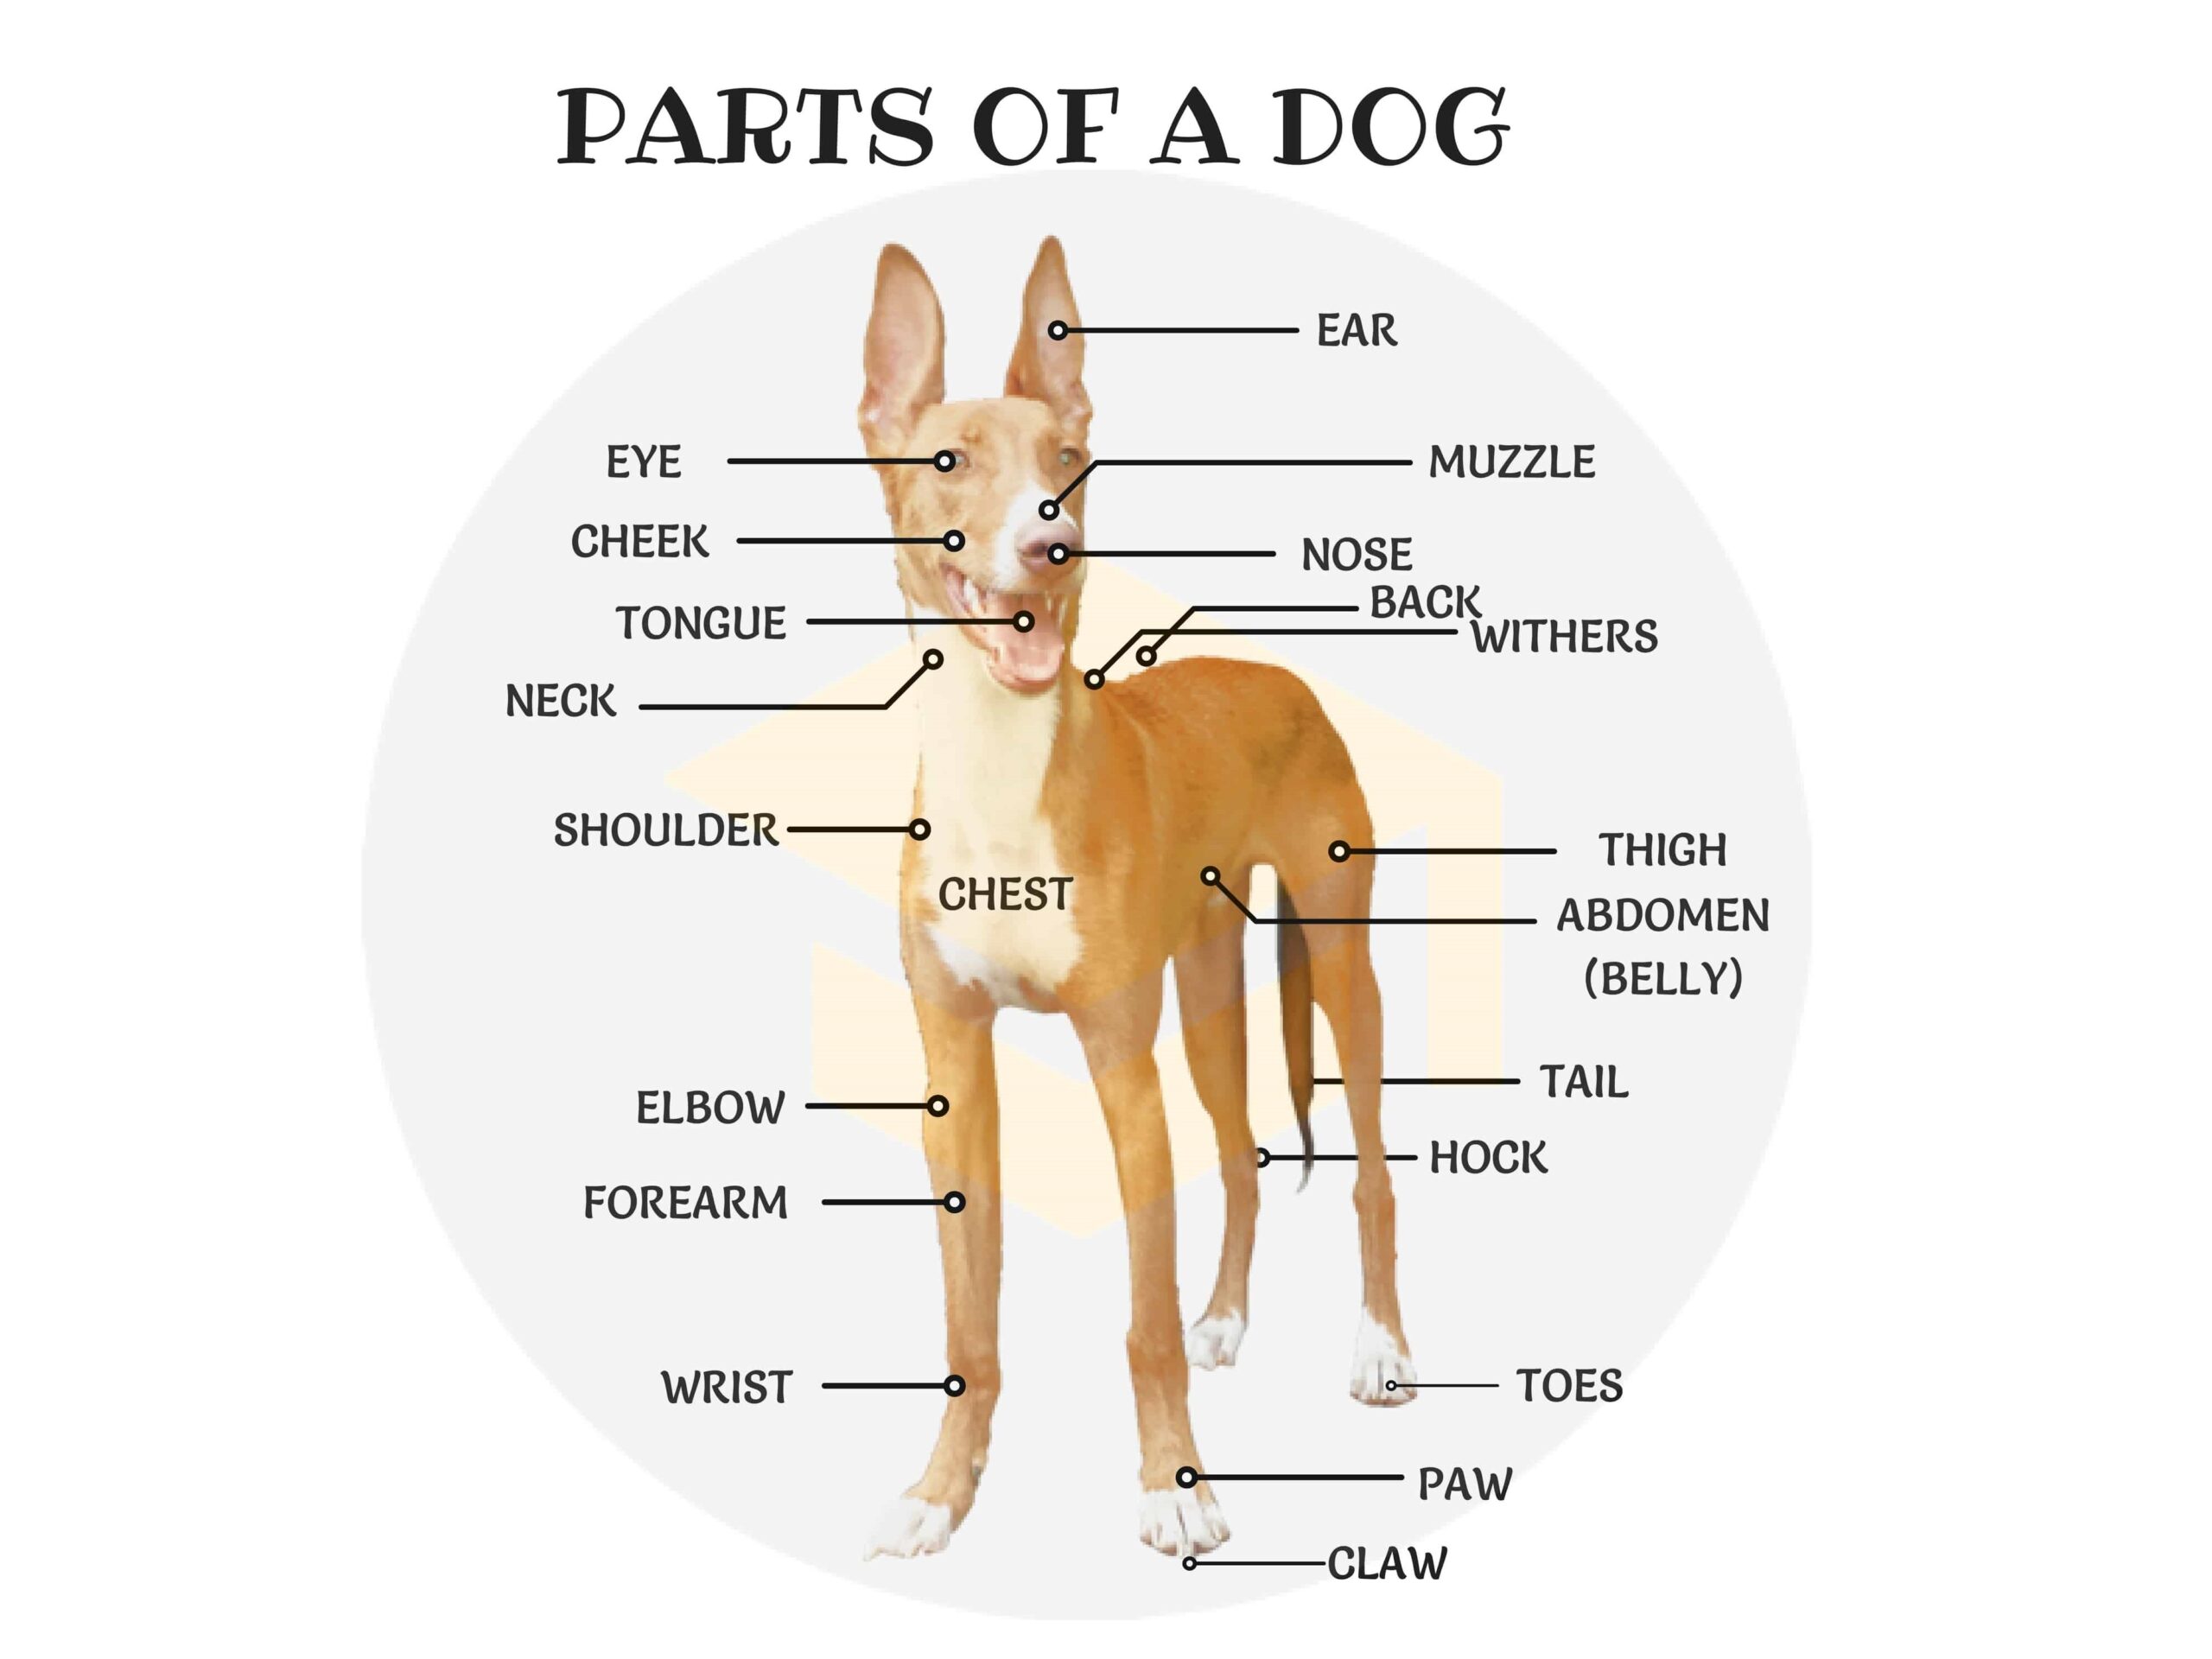 What is the most important body part of a dog?